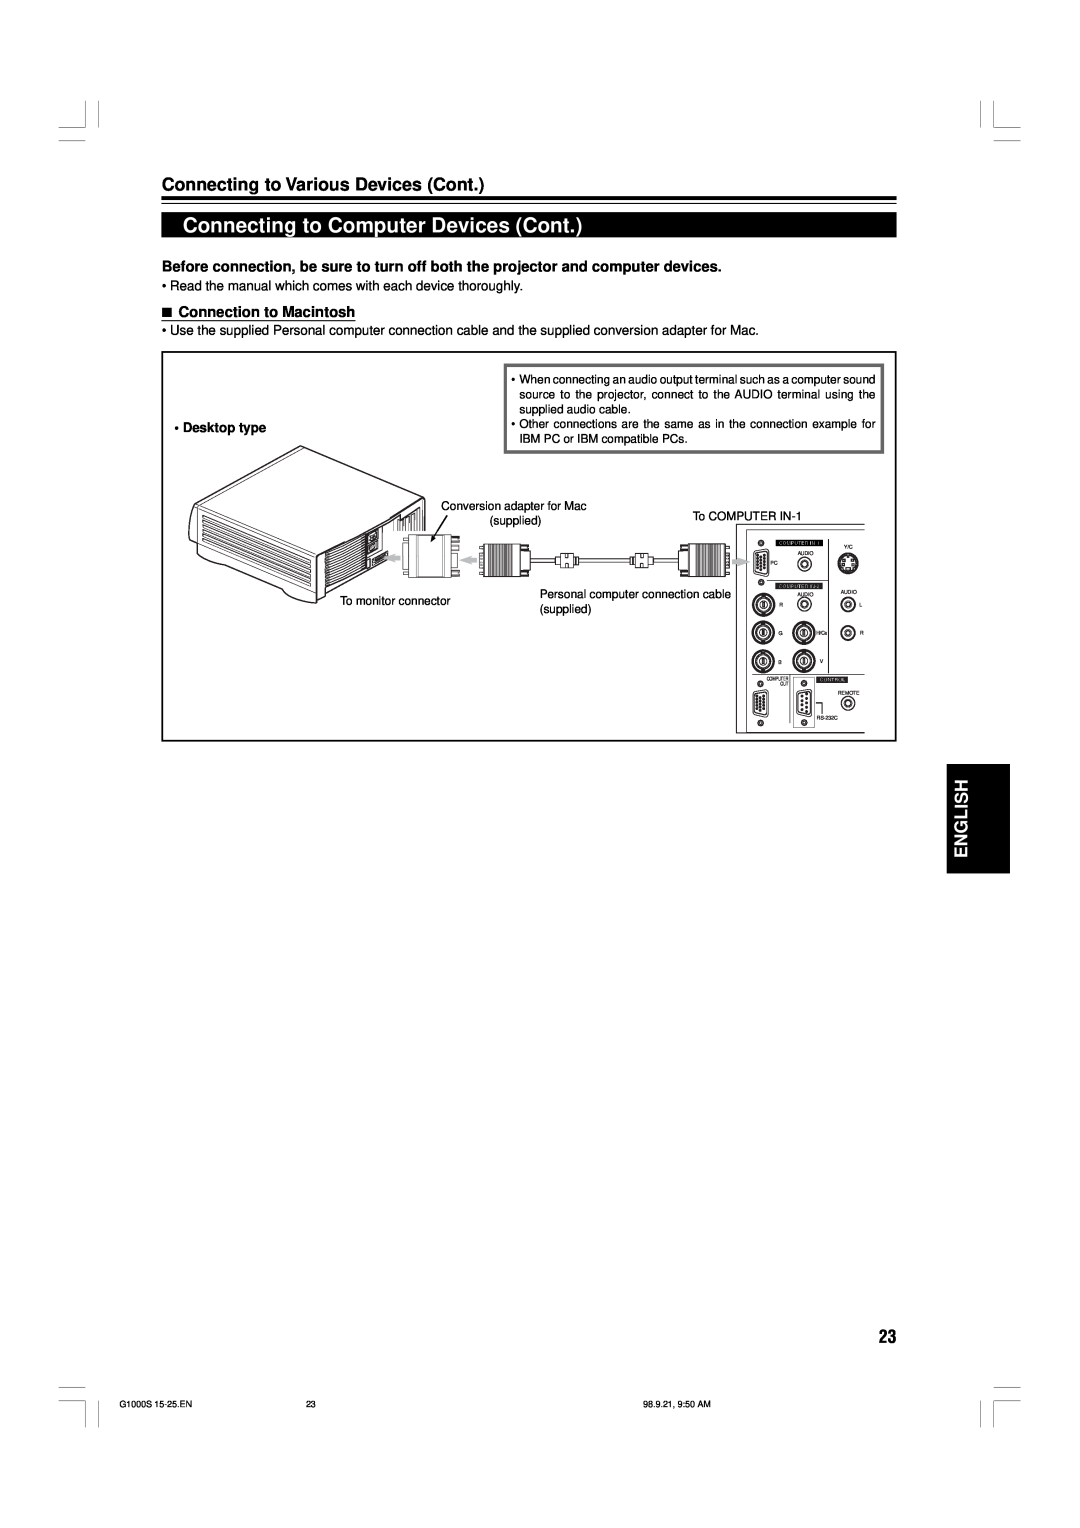 JVC G1000S manual Connecting to Computer Devices Cont, Connecting to Various Devices Cont, English, Connection to Macintosh 